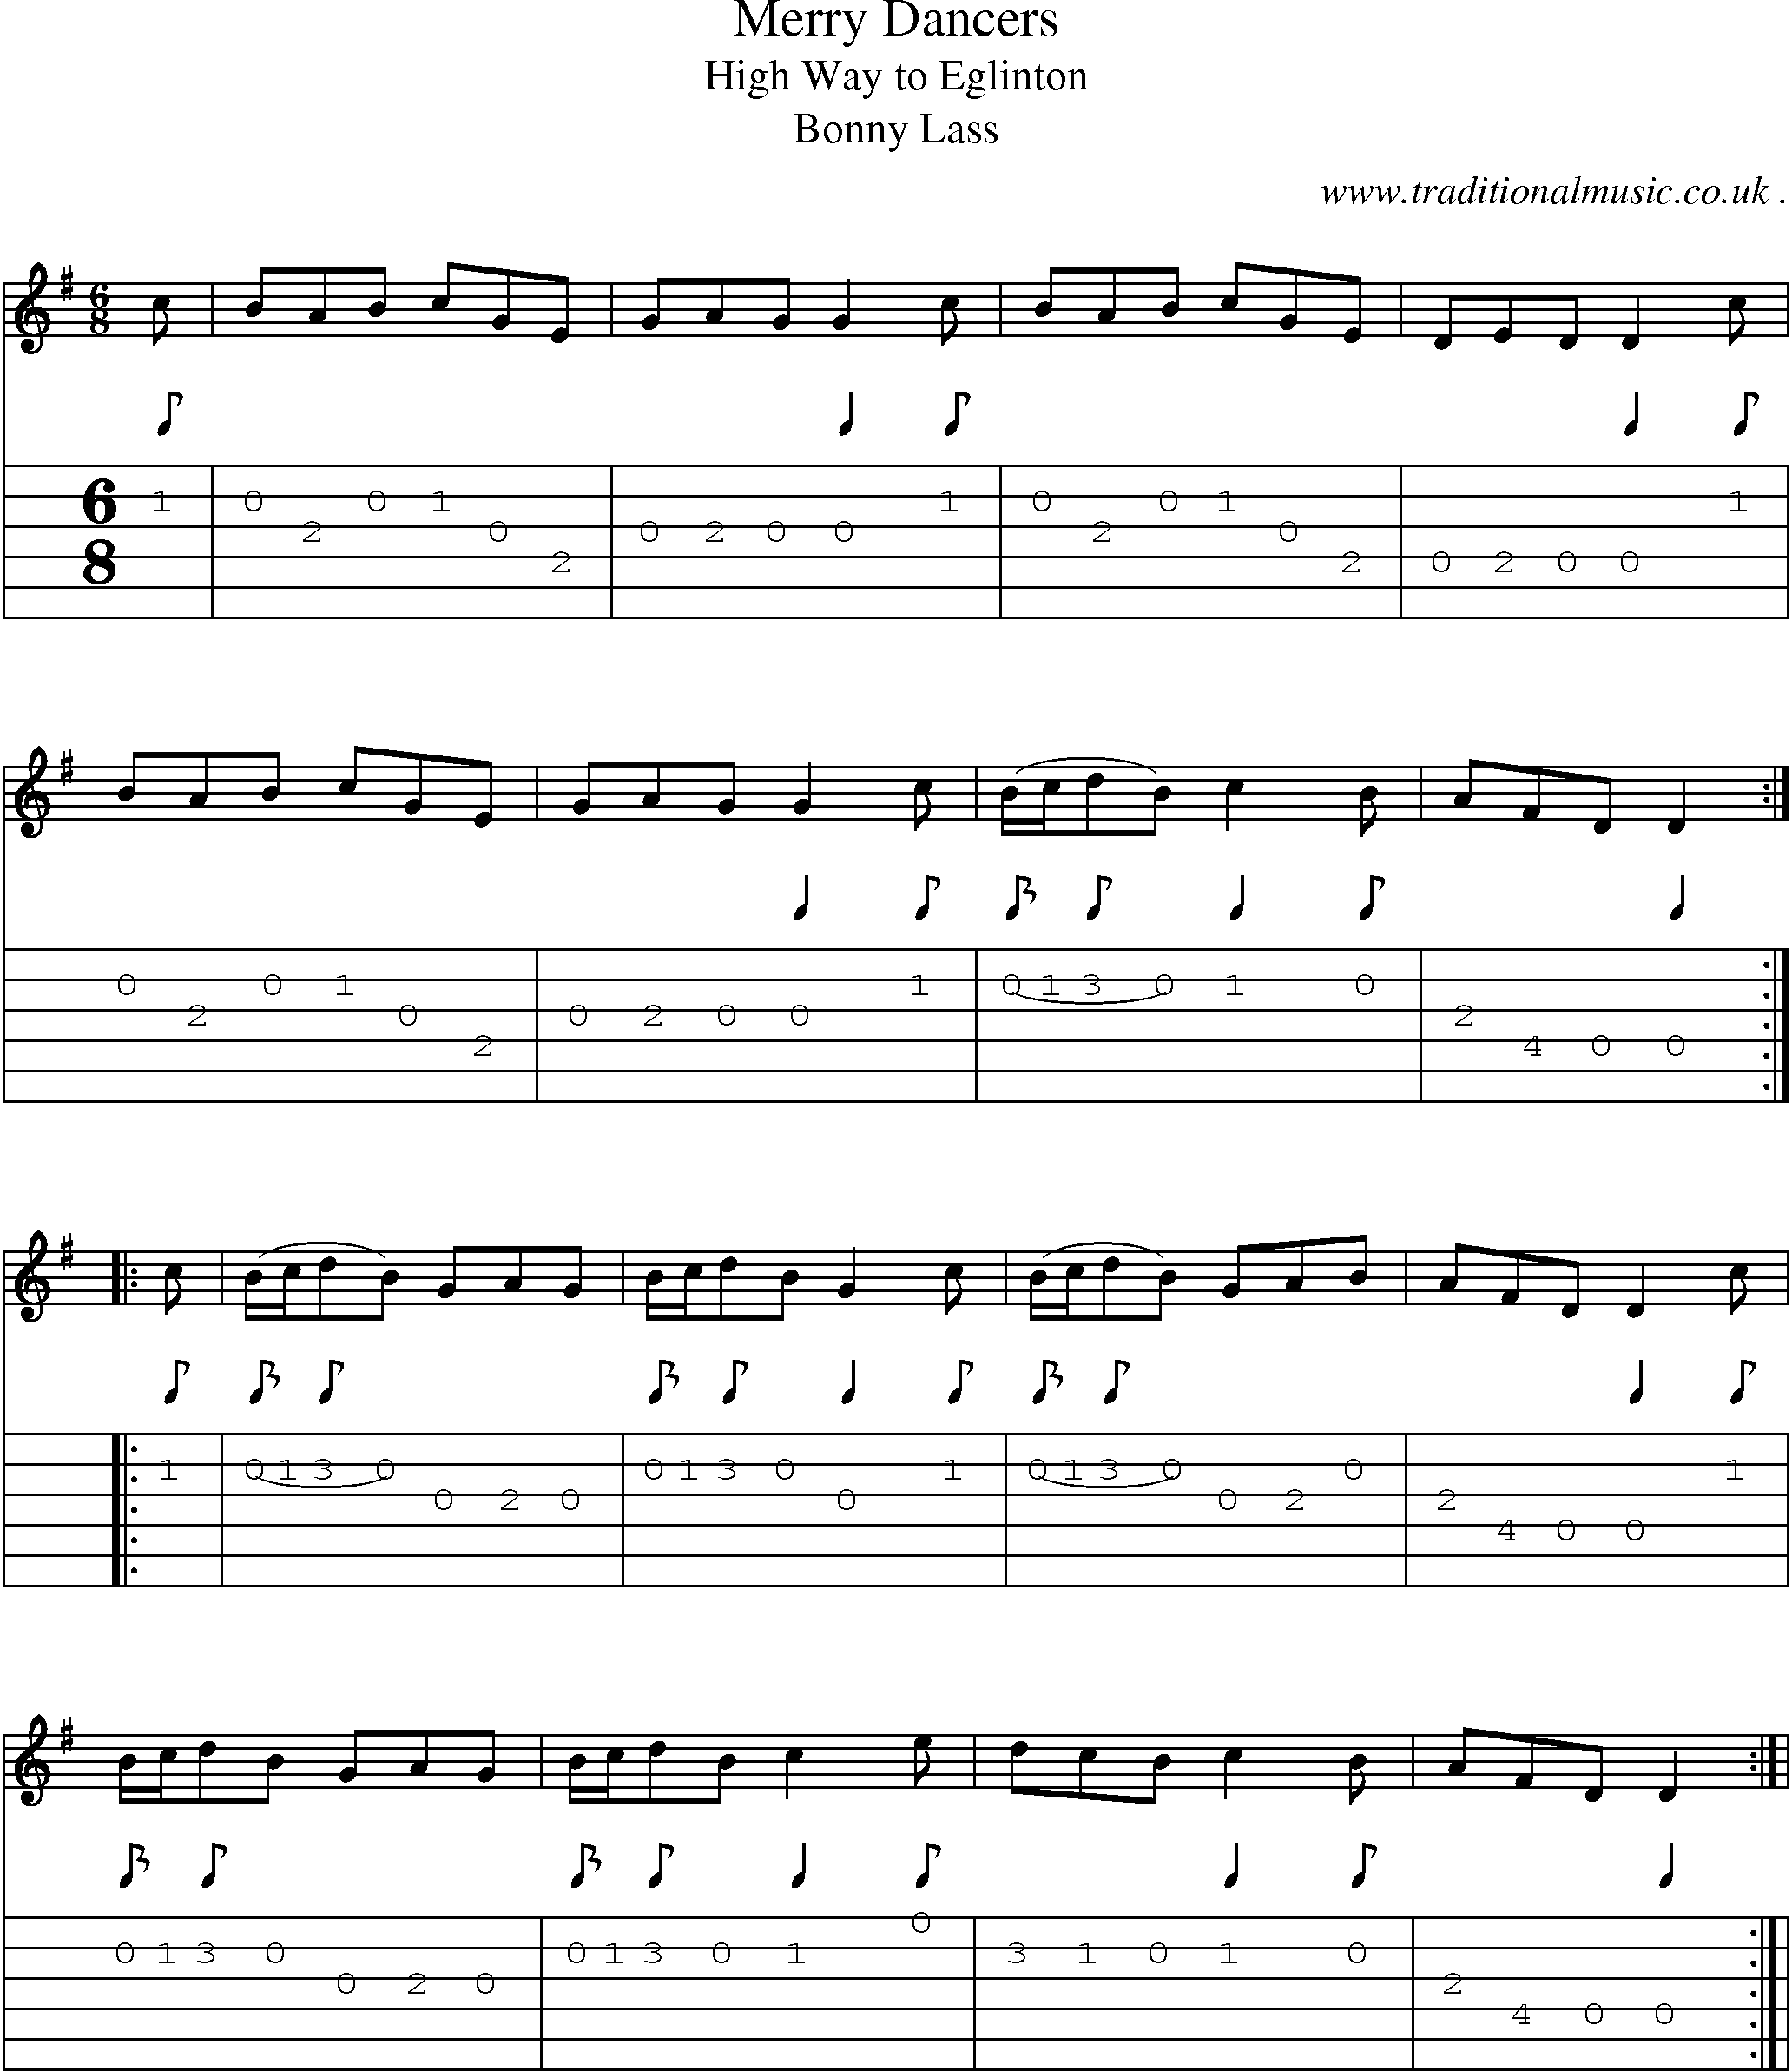 Sheet-Music and Guitar Tabs for Merry Dancers